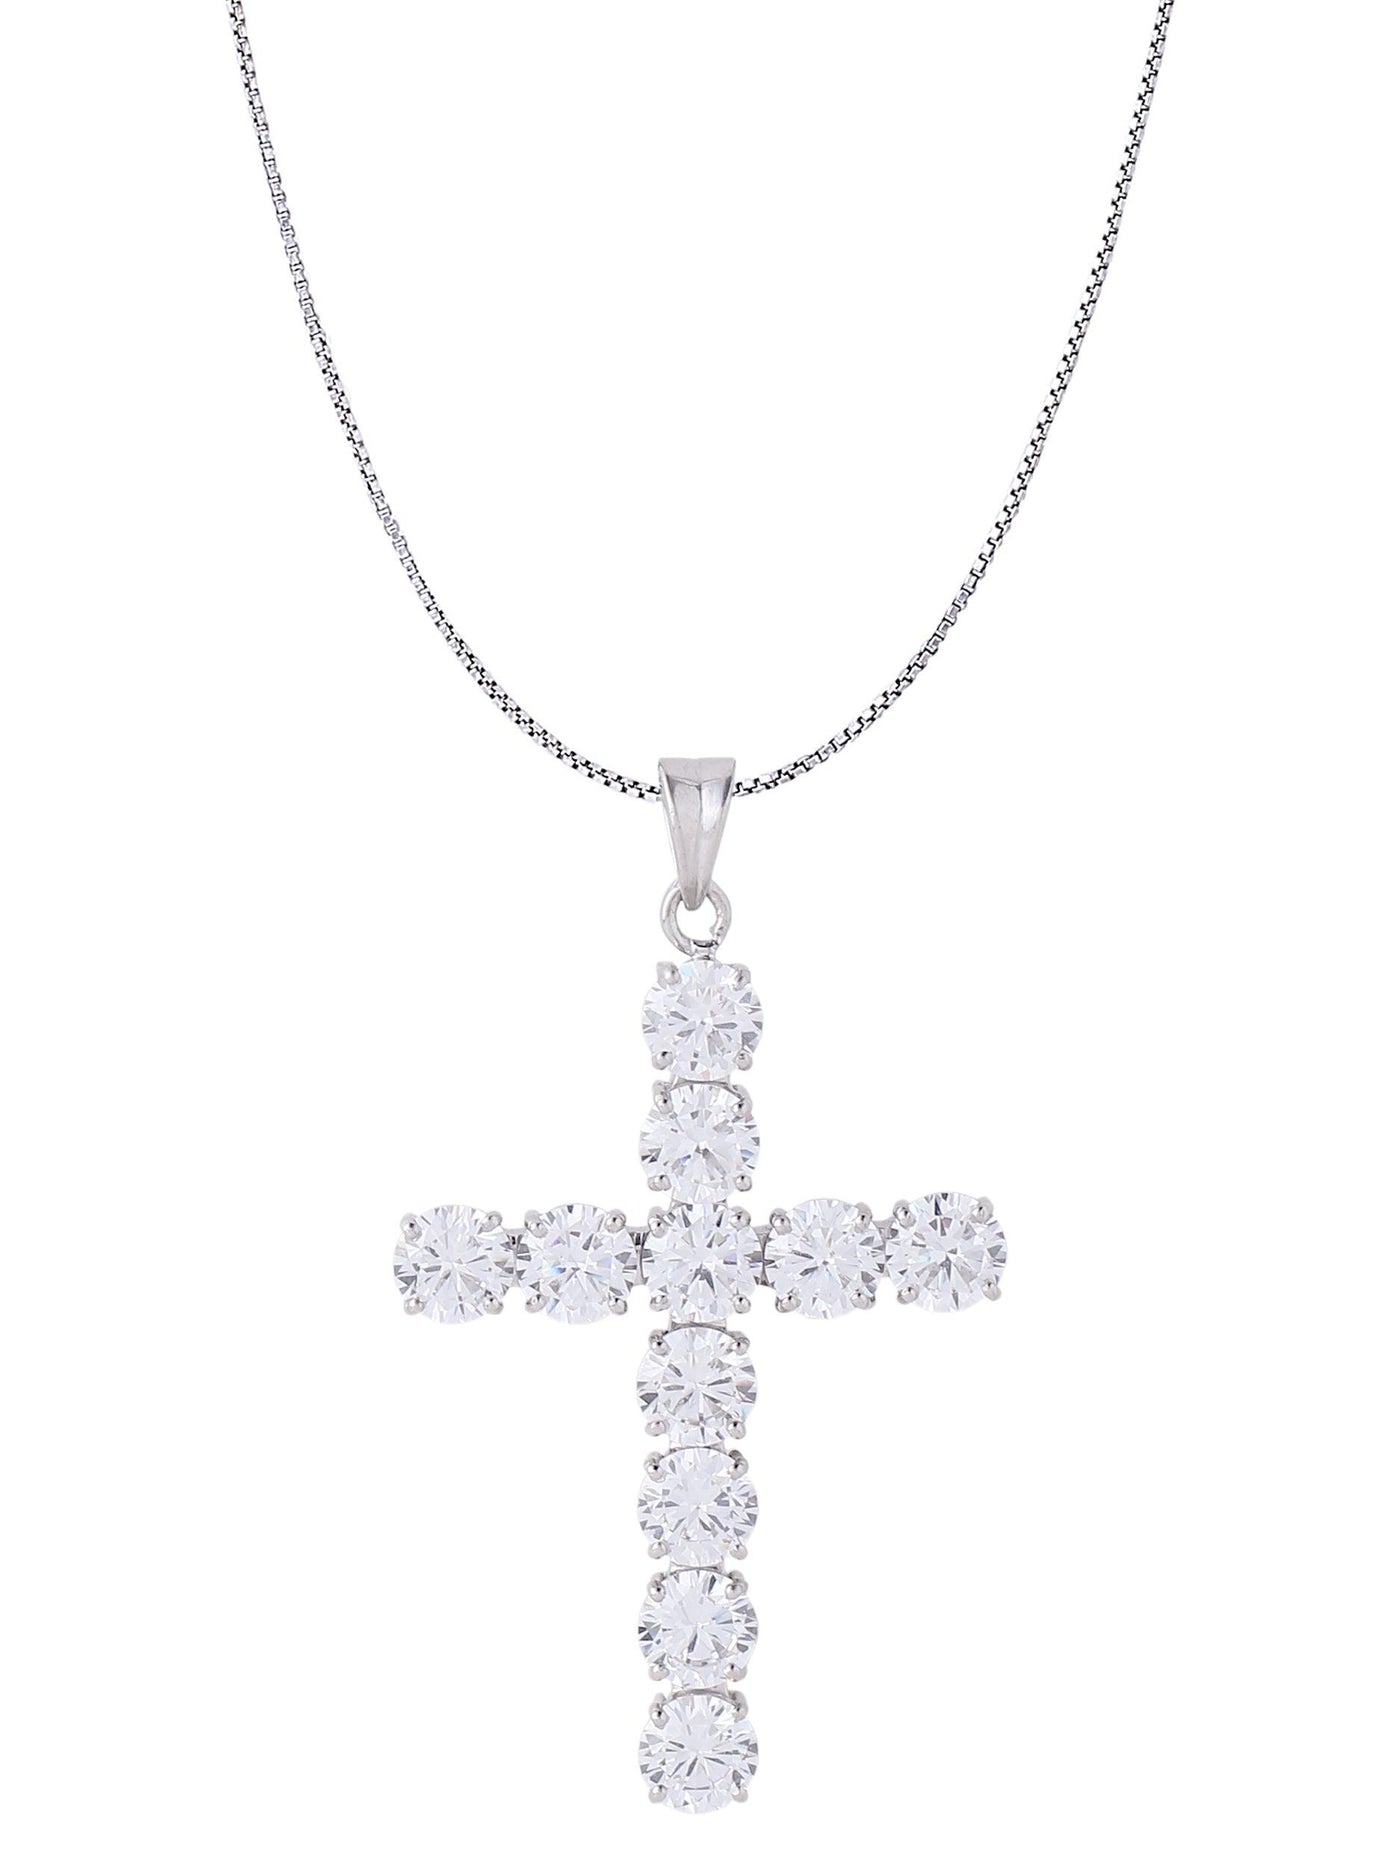 White Gold Color Classic Cross Pendant Made of 925 Sterling Silver Material with 20 Inch Long Silver Chain